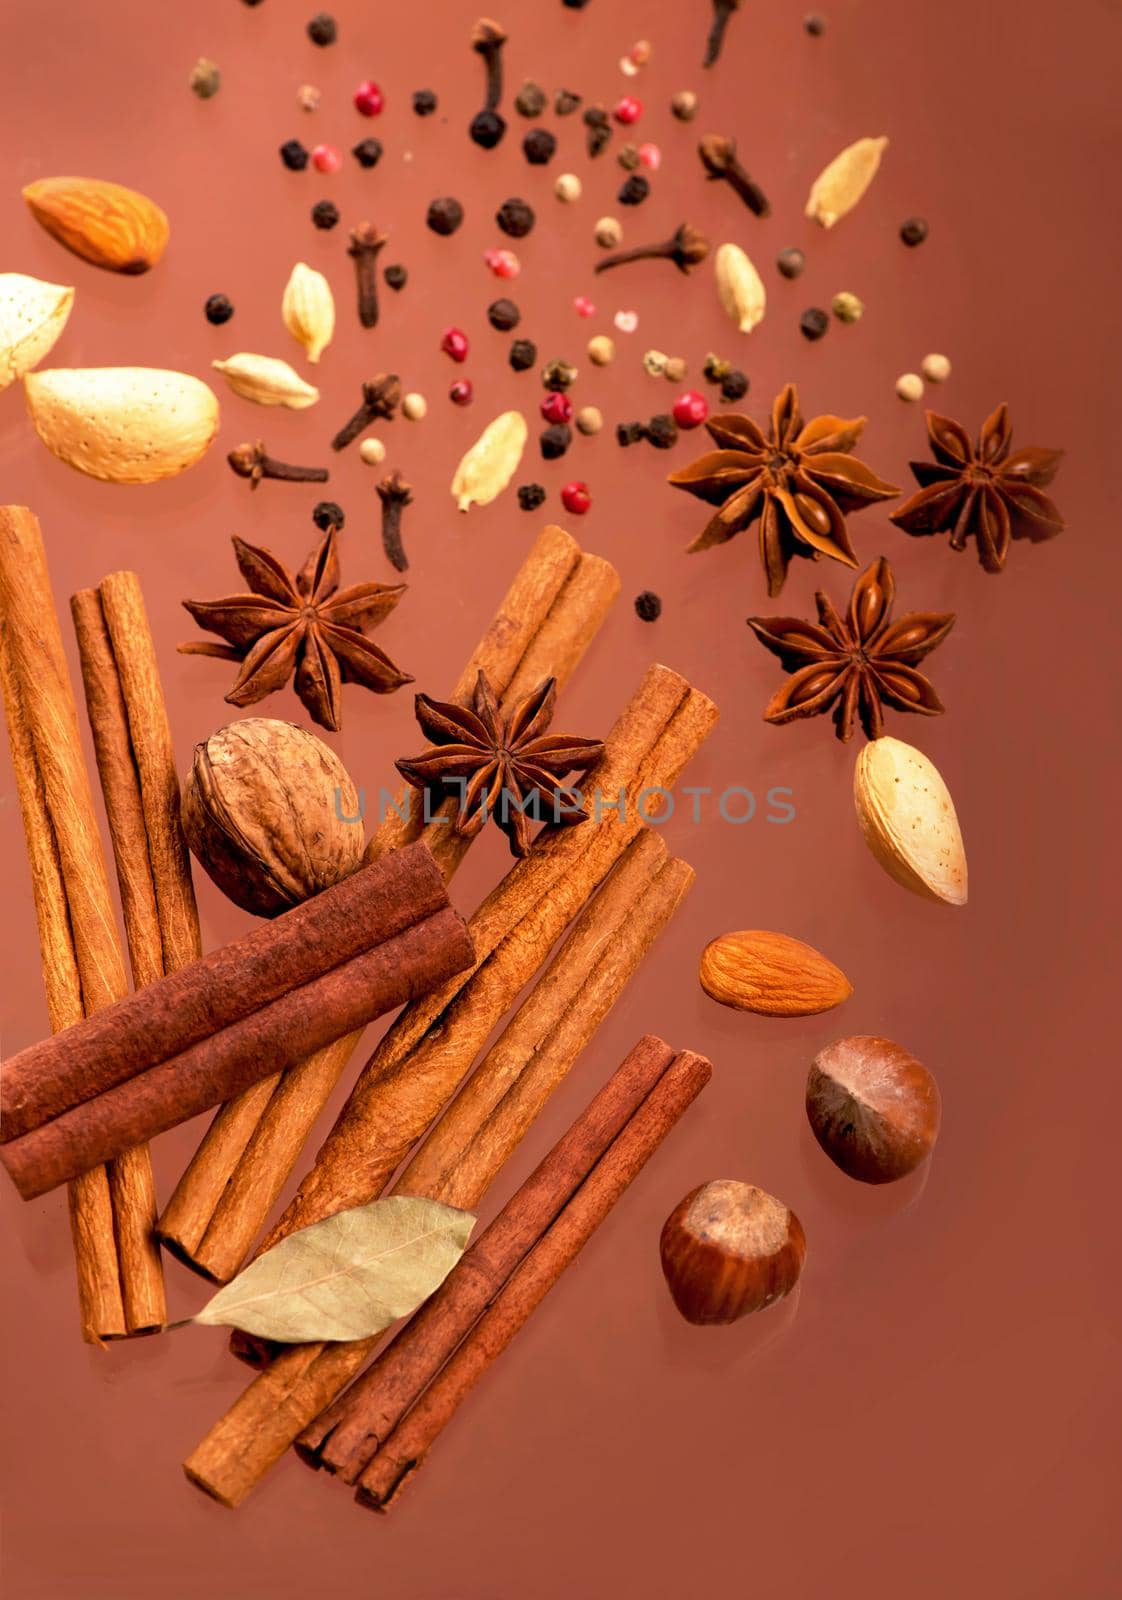 Traditional Christmas spices - Star anise with cinnamon and cloves on wooden background